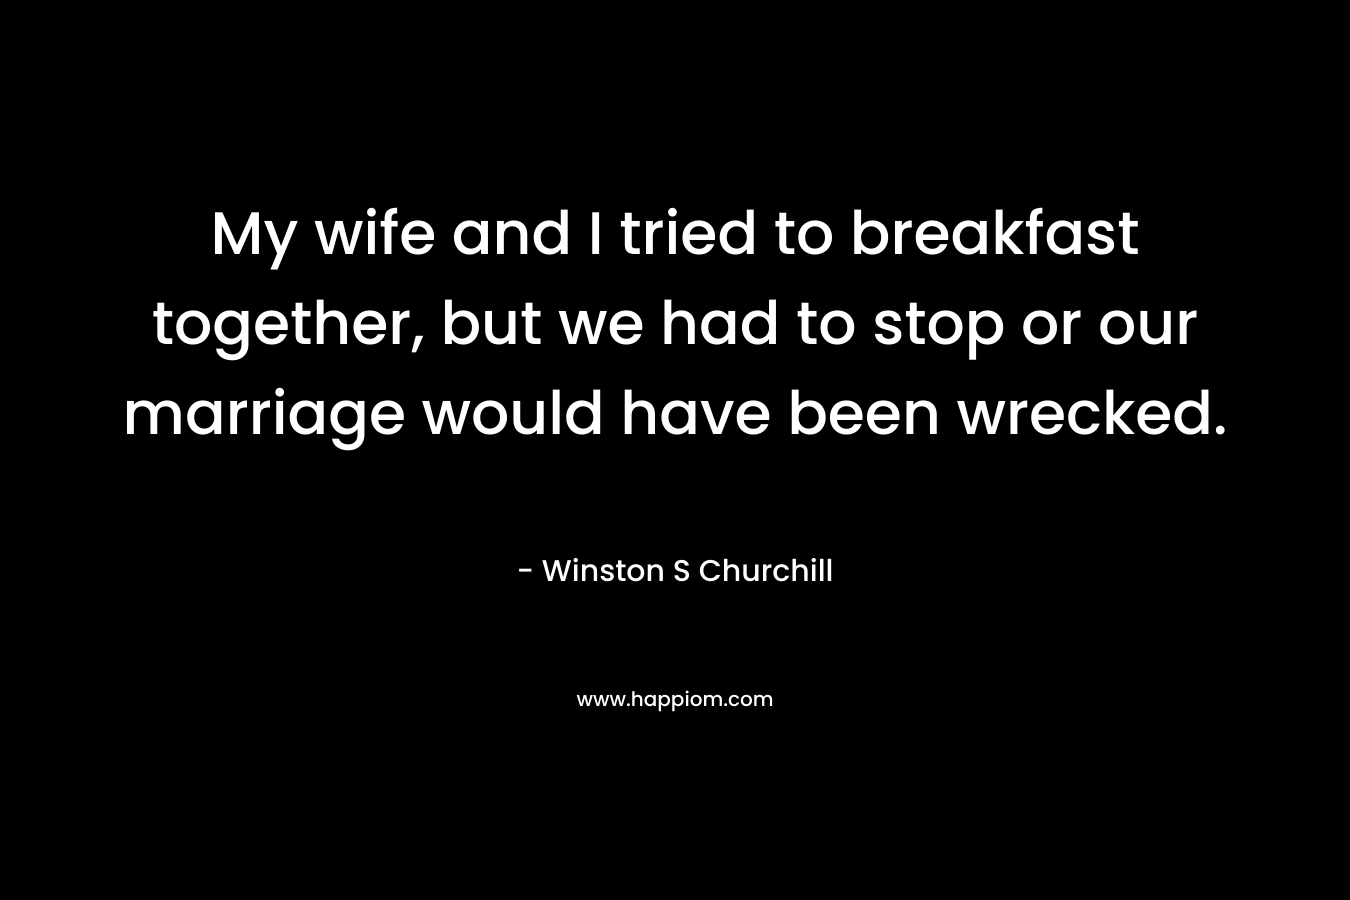 My wife and I tried to breakfast together, but we had to stop or our marriage would have been wrecked. – Winston S Churchill